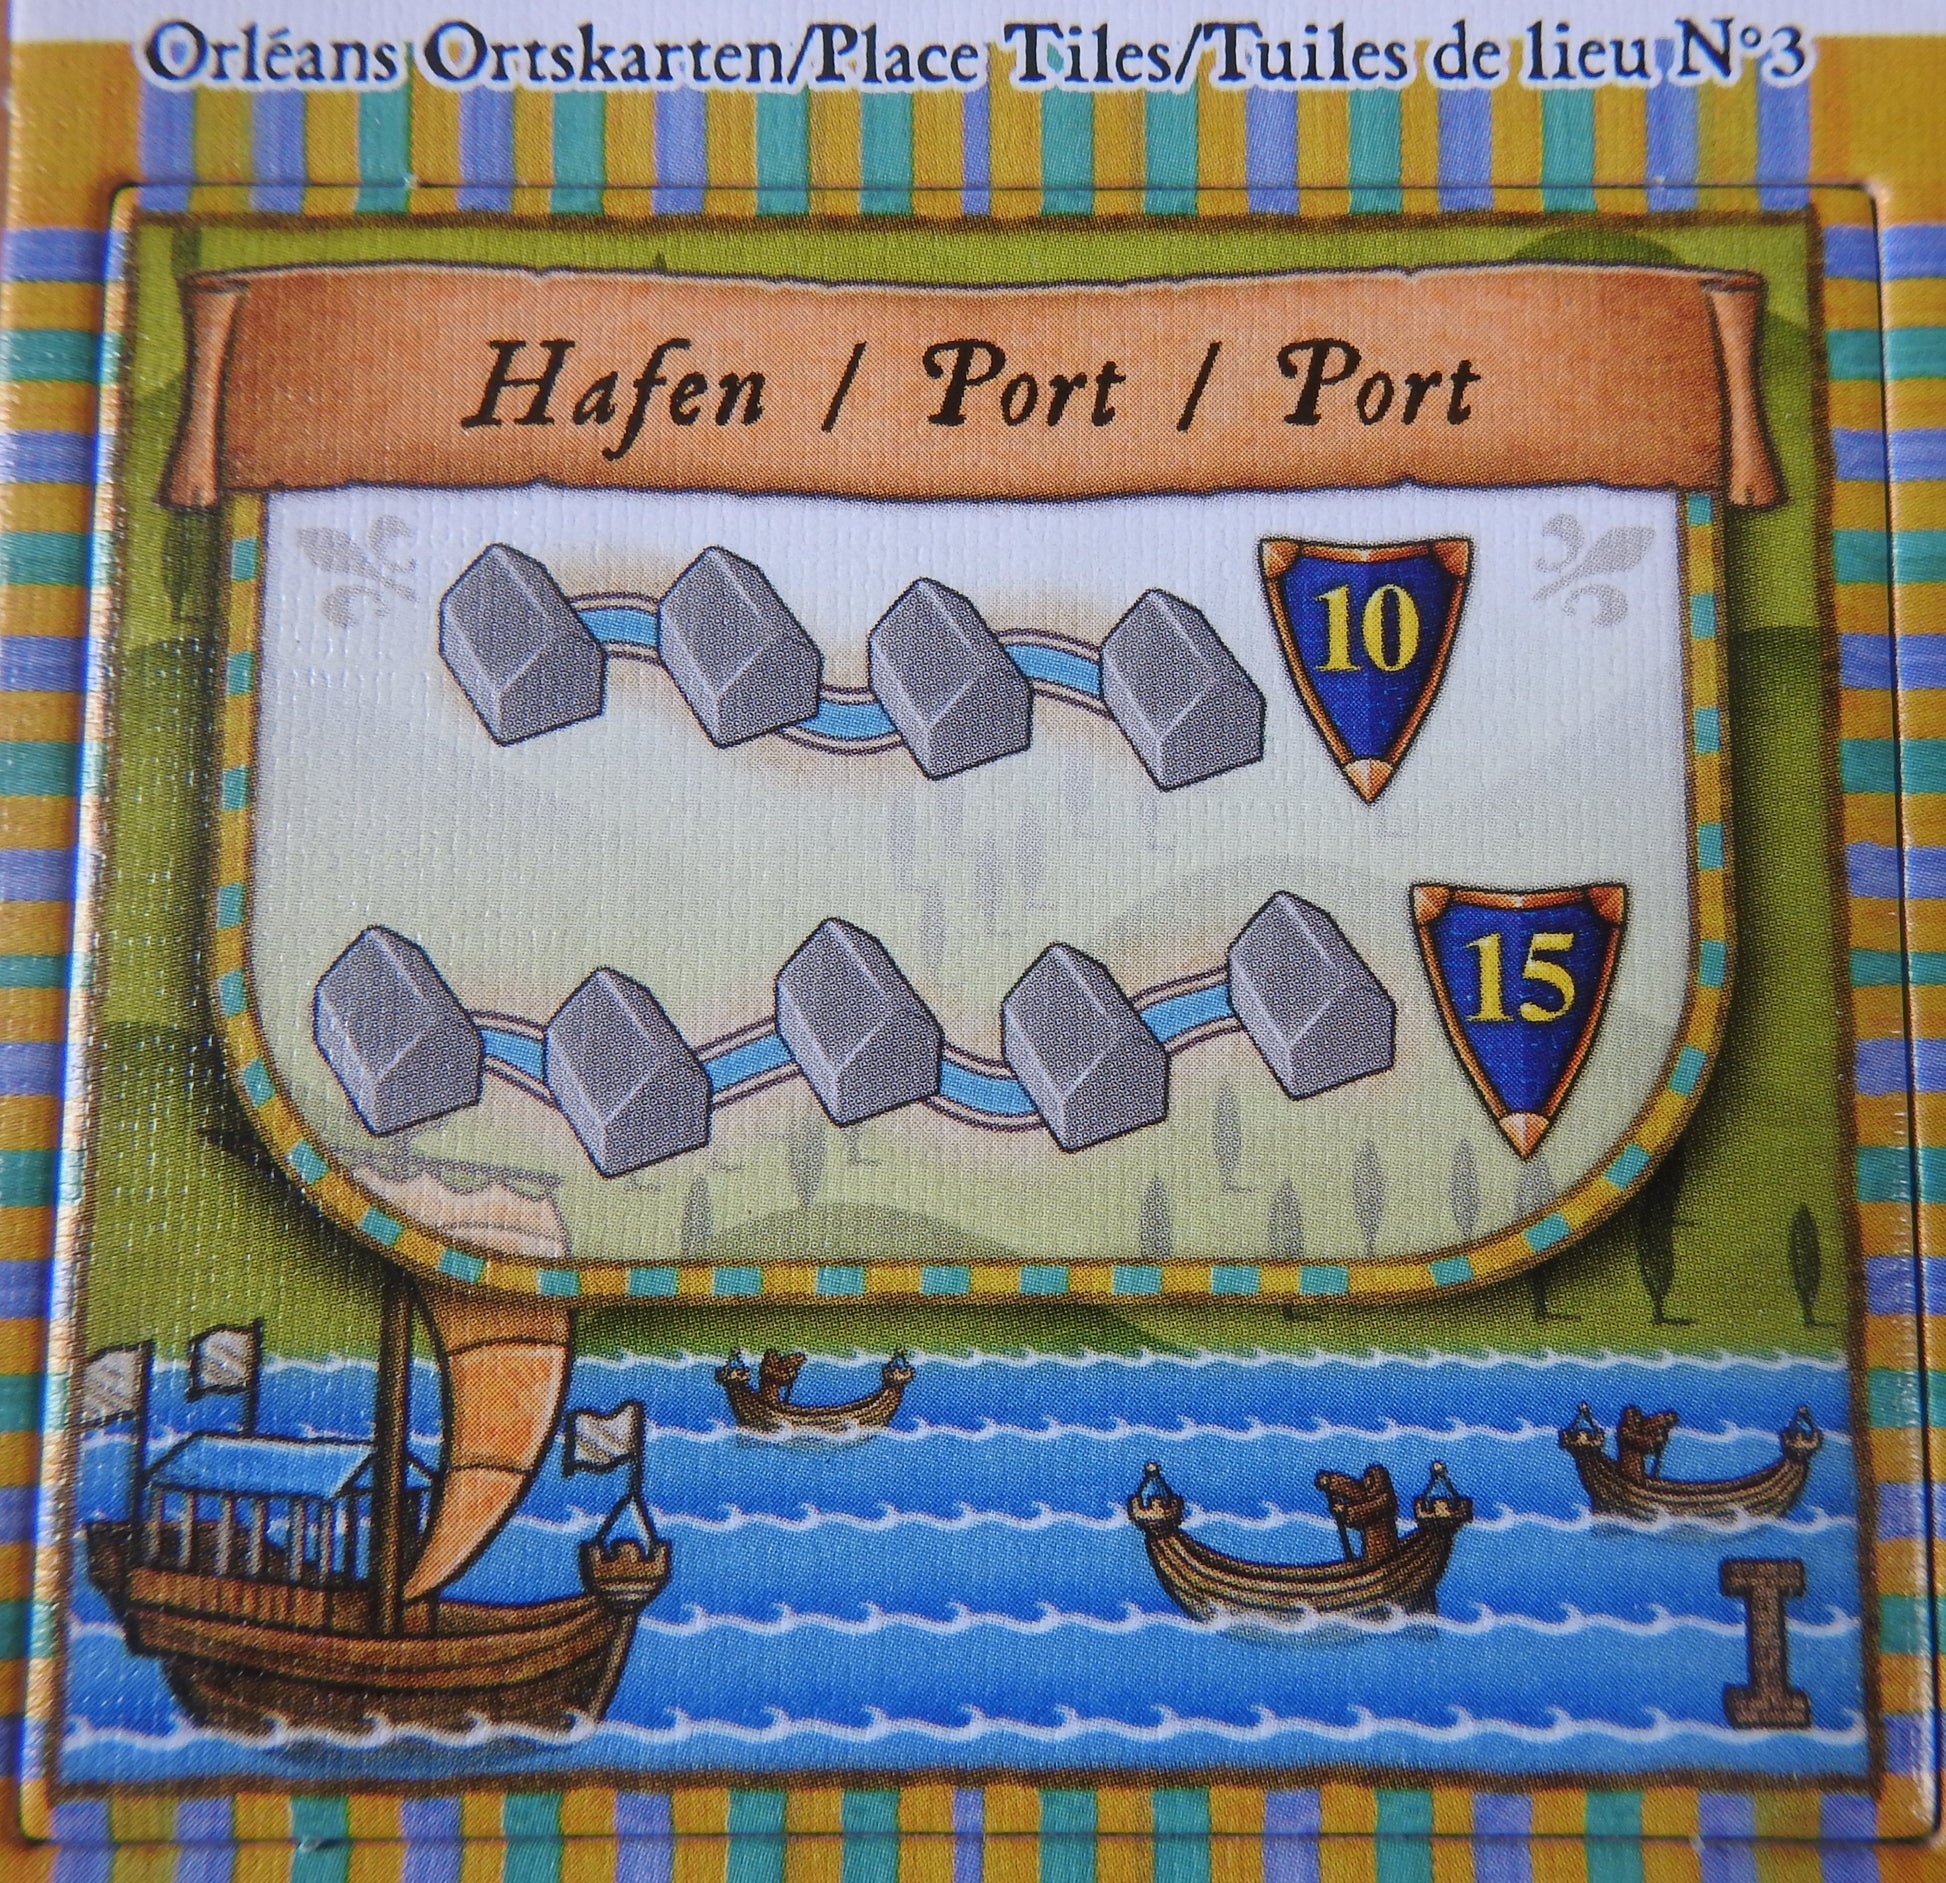 Close-up of the Port new place tile.